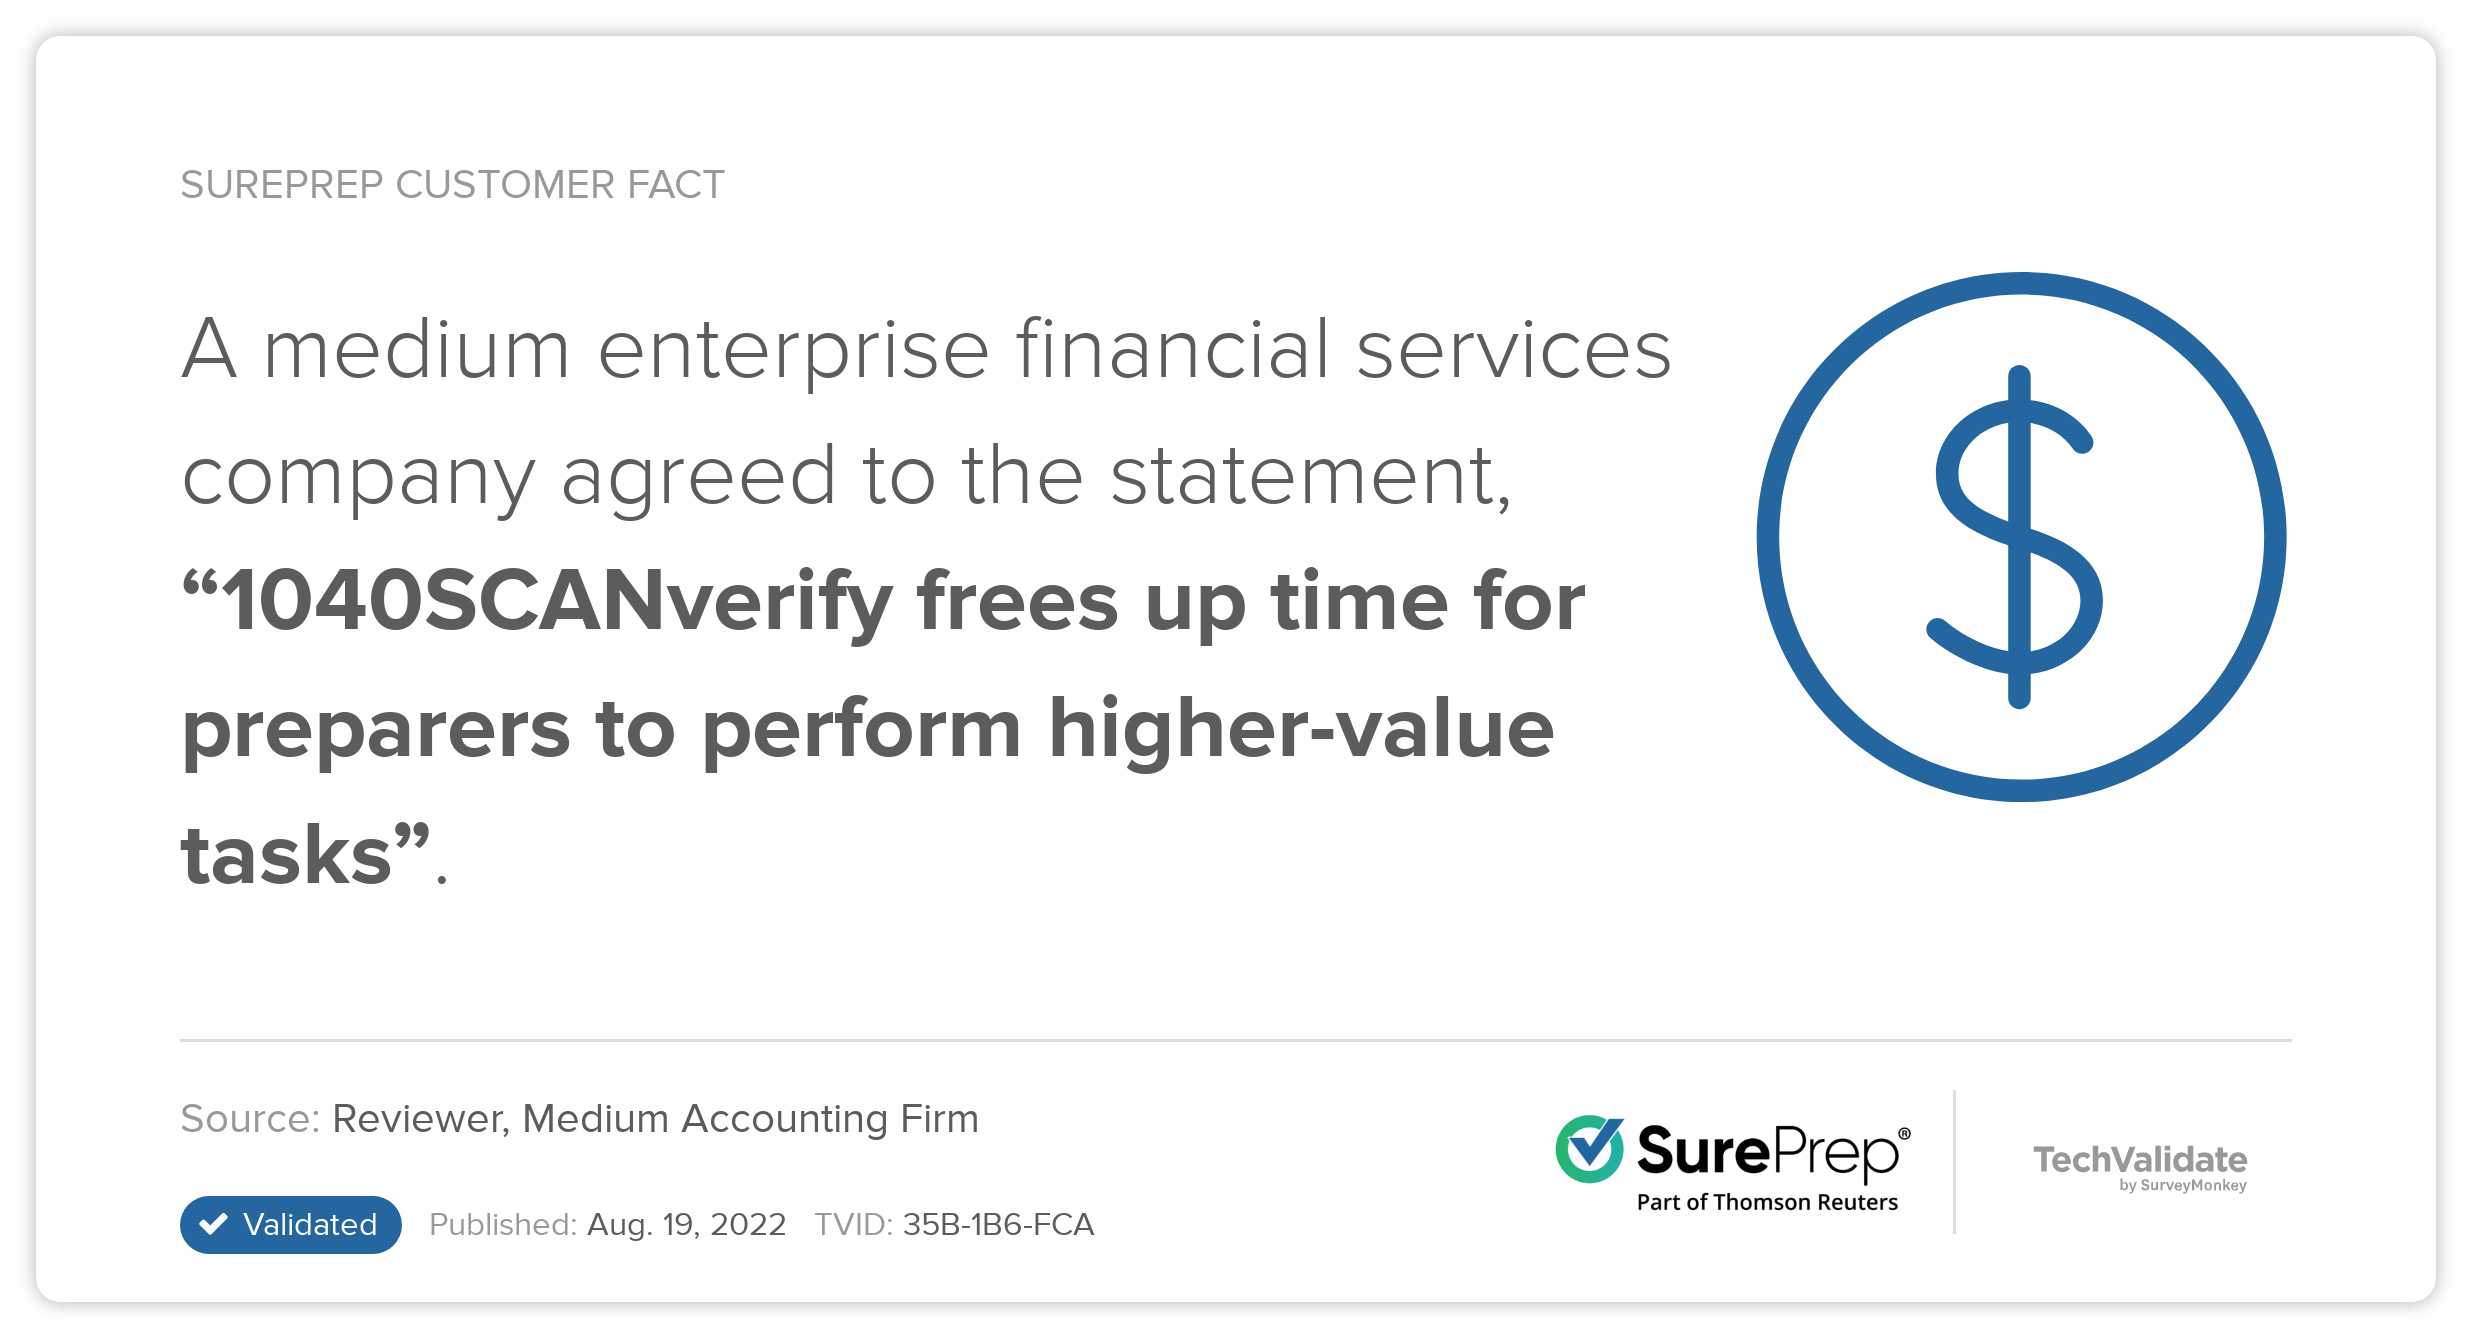 A medium enterprise financial services company agreed to the statement, "1040SCANverify frees up time for preparers to perform high-value tasks."